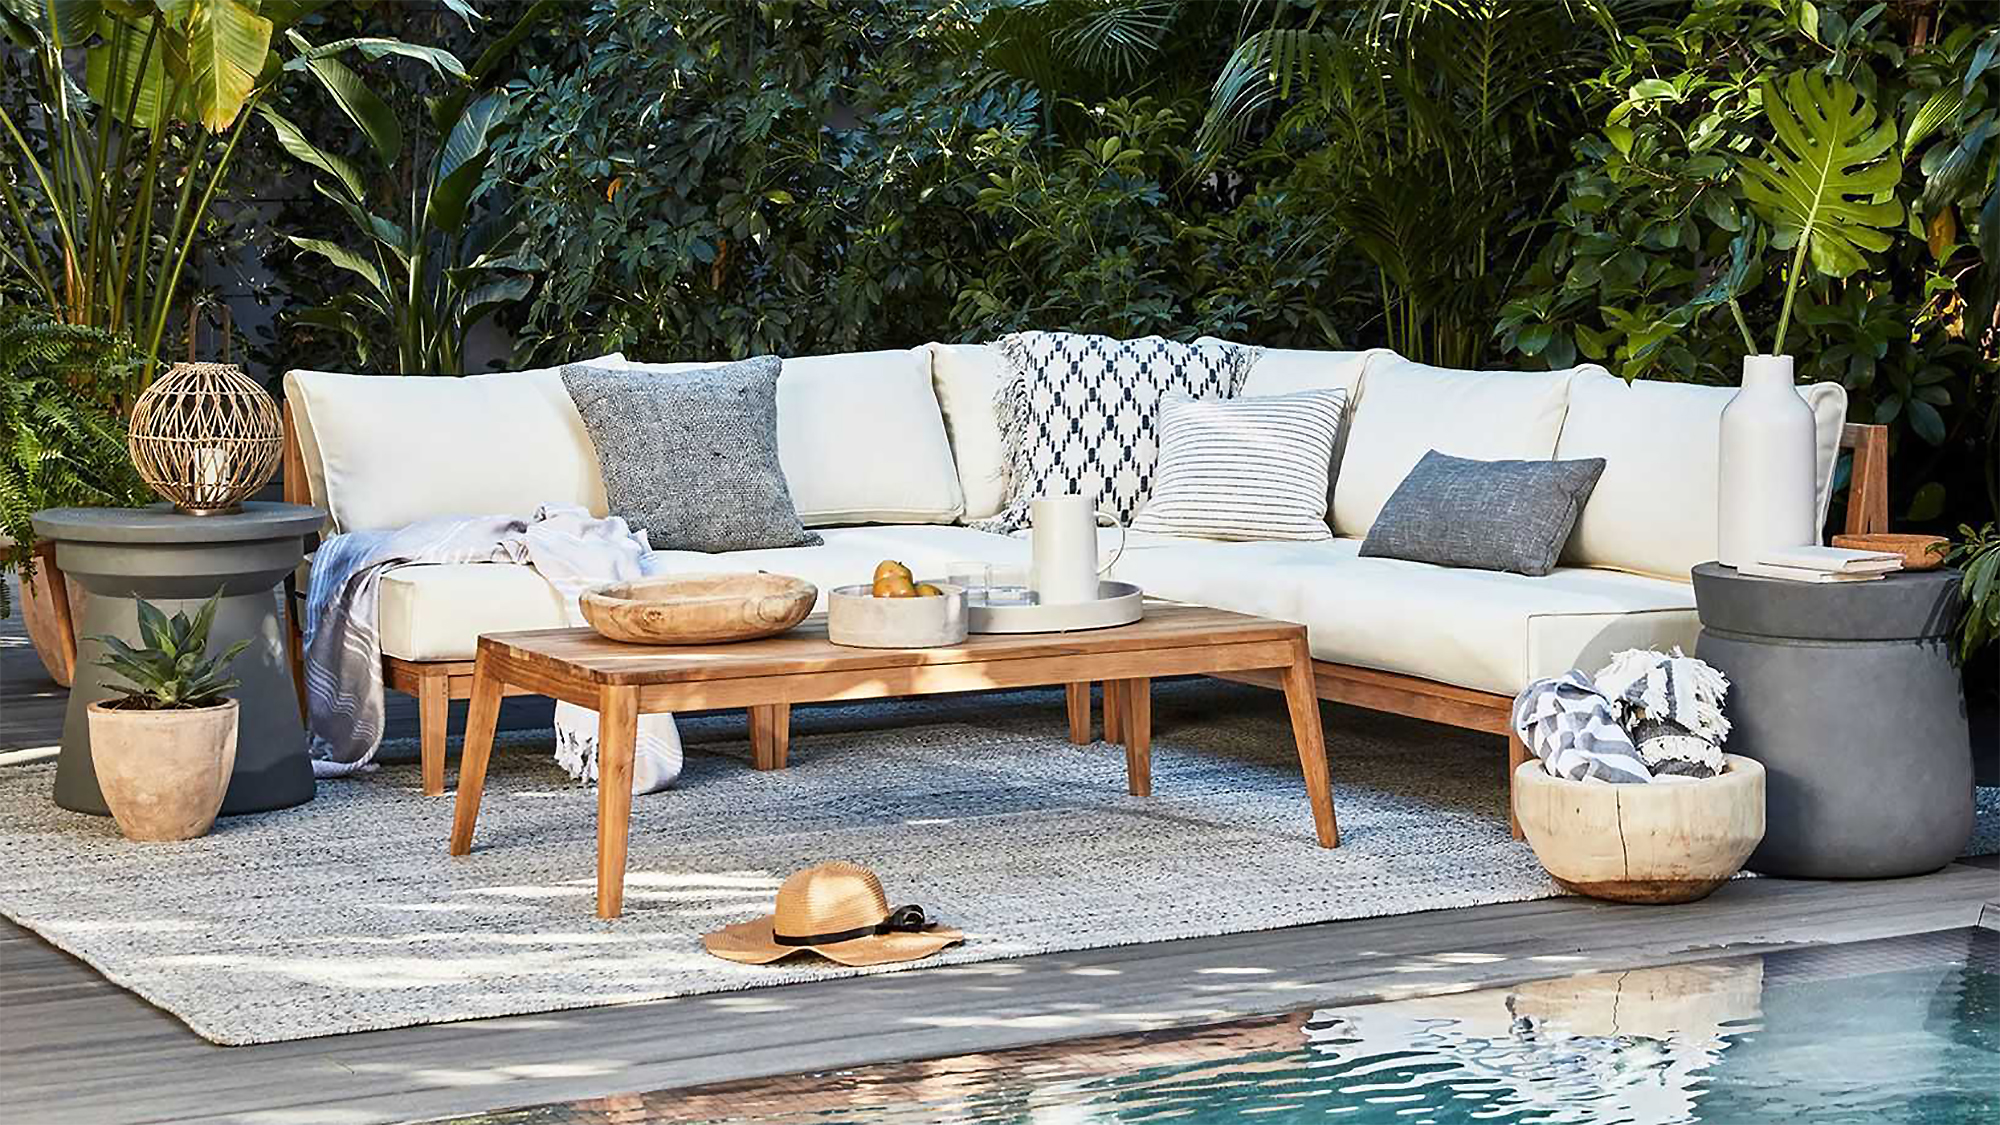 What Are The Top Things you Can Add With Outdoor Sectional? 